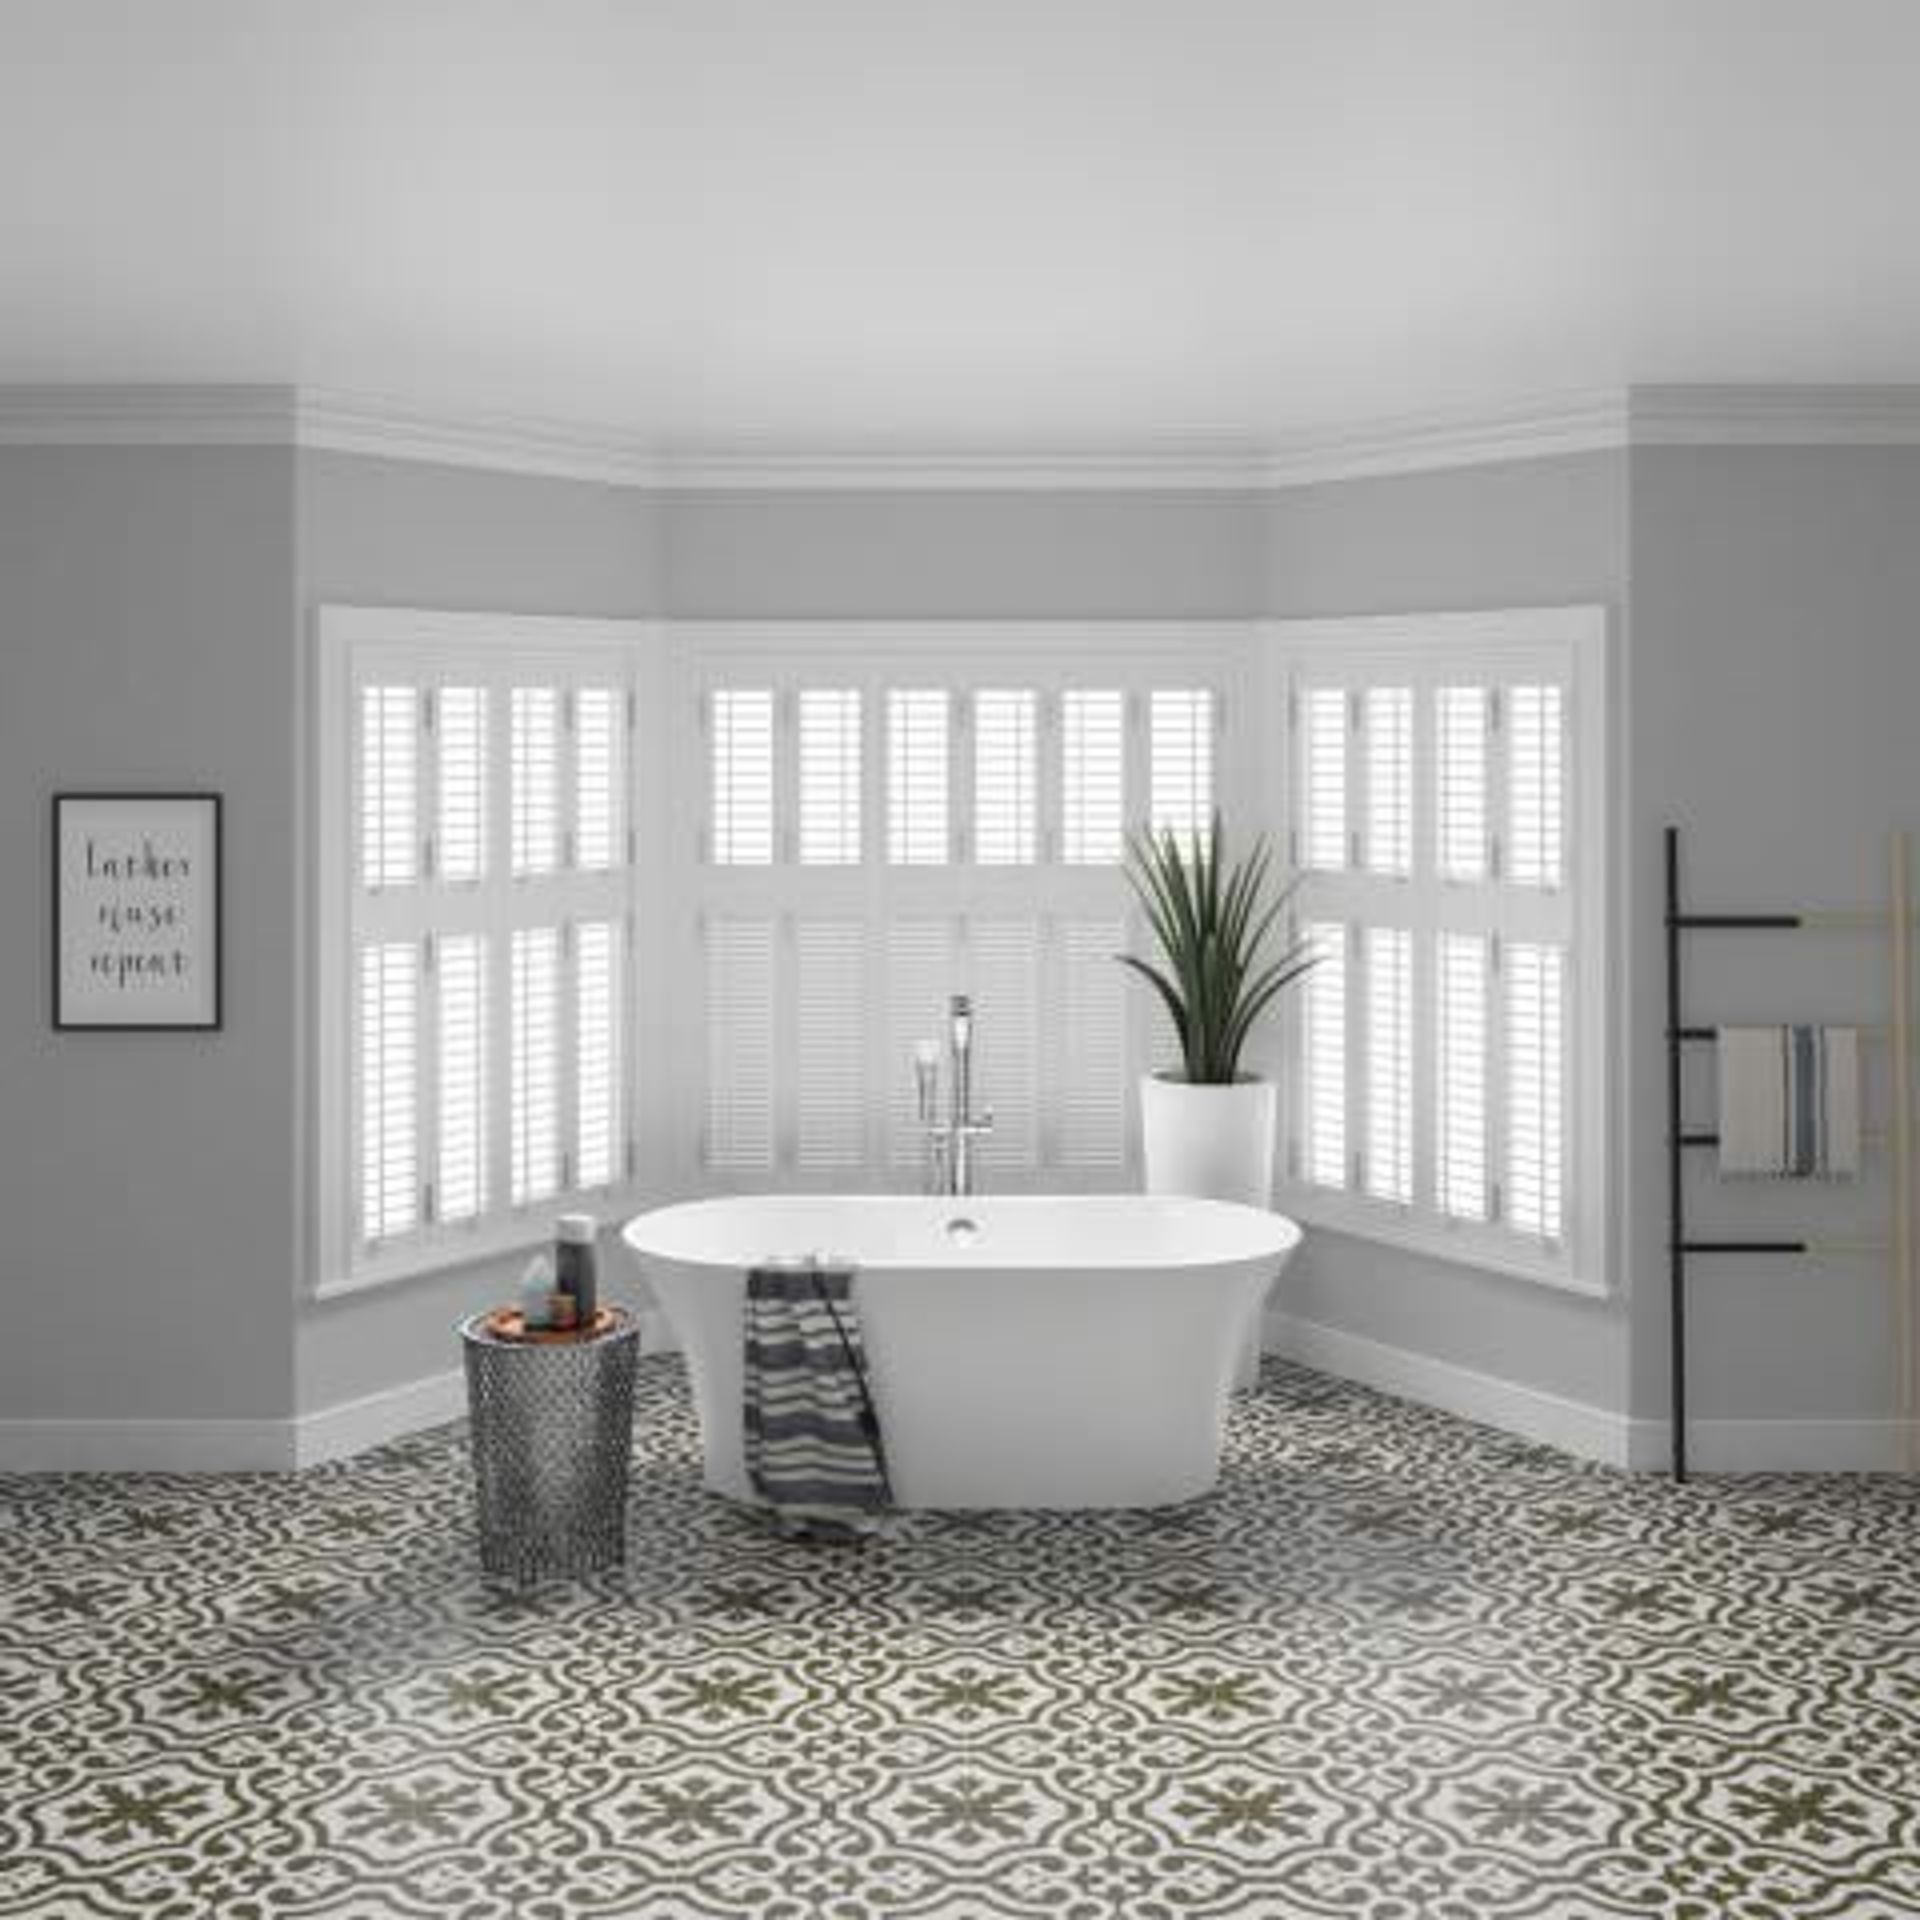 NEW 1600x750mm Ella Freestanding Bath - Large.RRP £2,499.BR259.This gloss white free-standing bath - Image 2 of 3